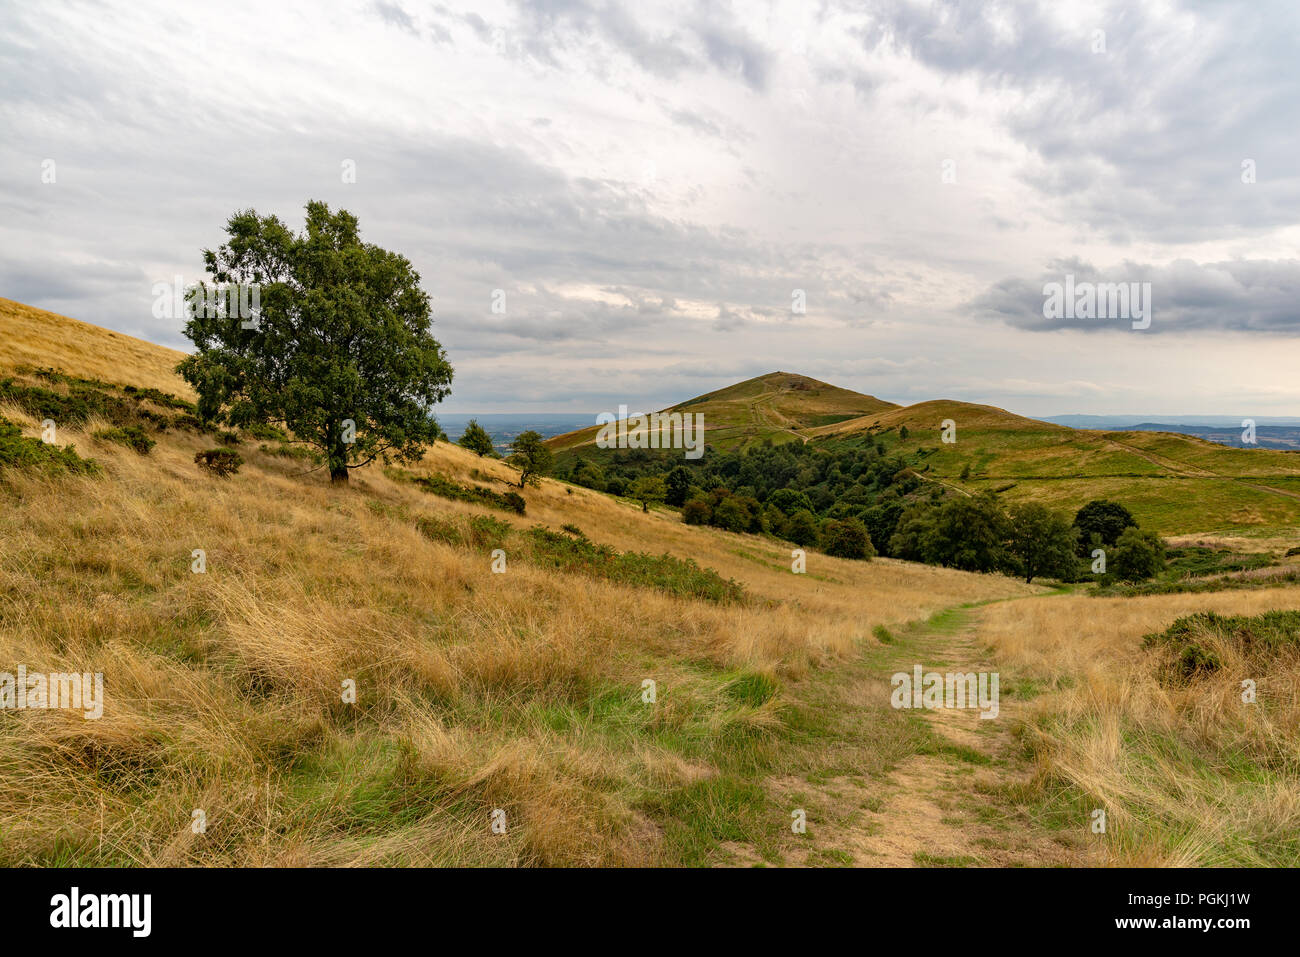 Looking towards the Worcestershire Beacon from North Hill, Malvern Hills,  Worcestershire, England, UK Stock Photo